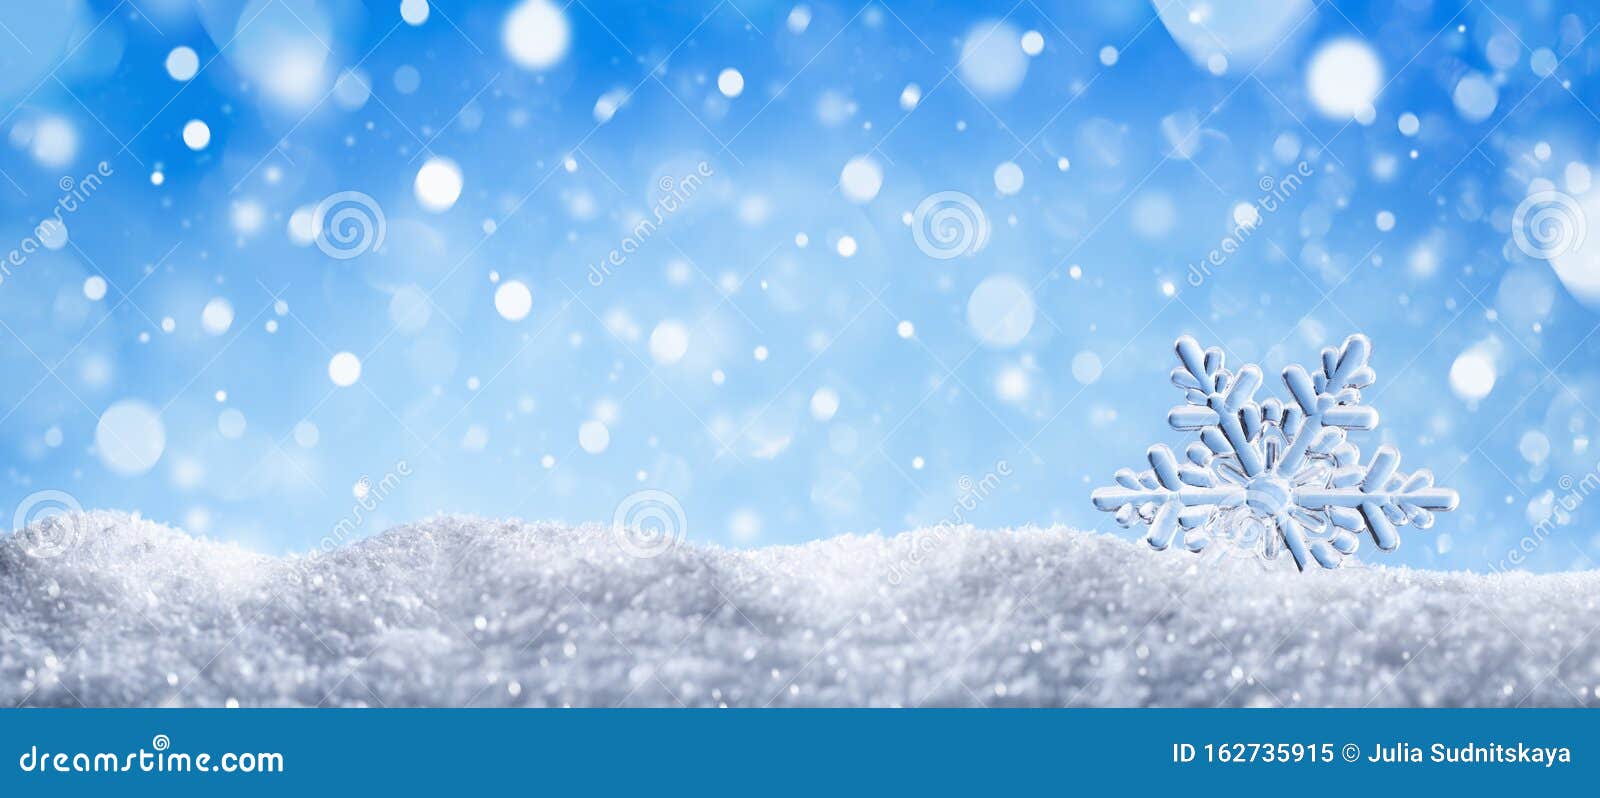 winter snow background with decorative snowflake against blue sky. banner format. beautiful wintertime holiday scene